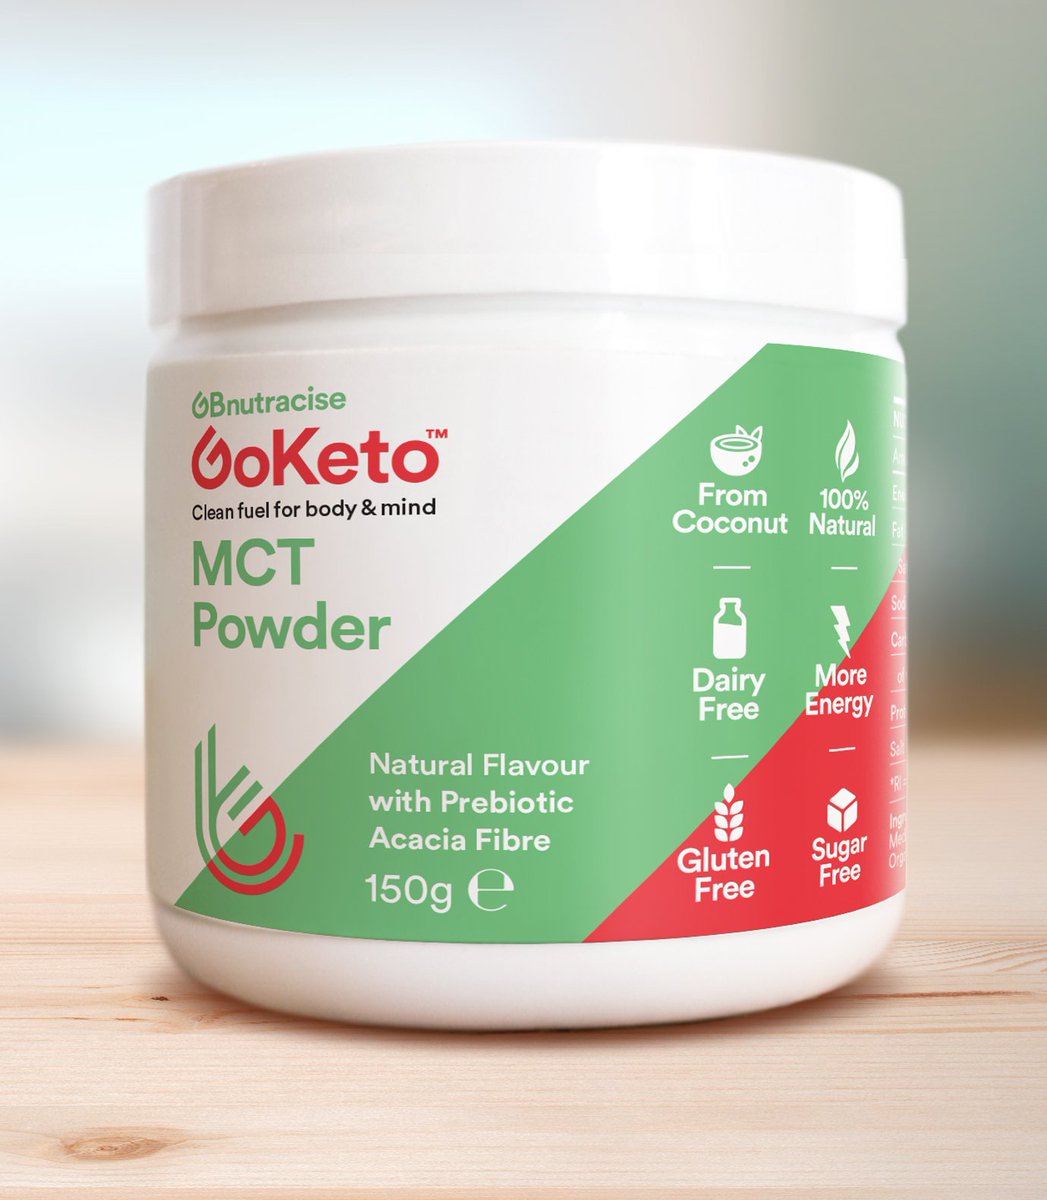 Our MCT's are carbohydrate-free, filler Free with added Acacia prebiotic for a healthy Gut.
#MCT2019 #keto #gonutro #mctcoffee #coffeetime